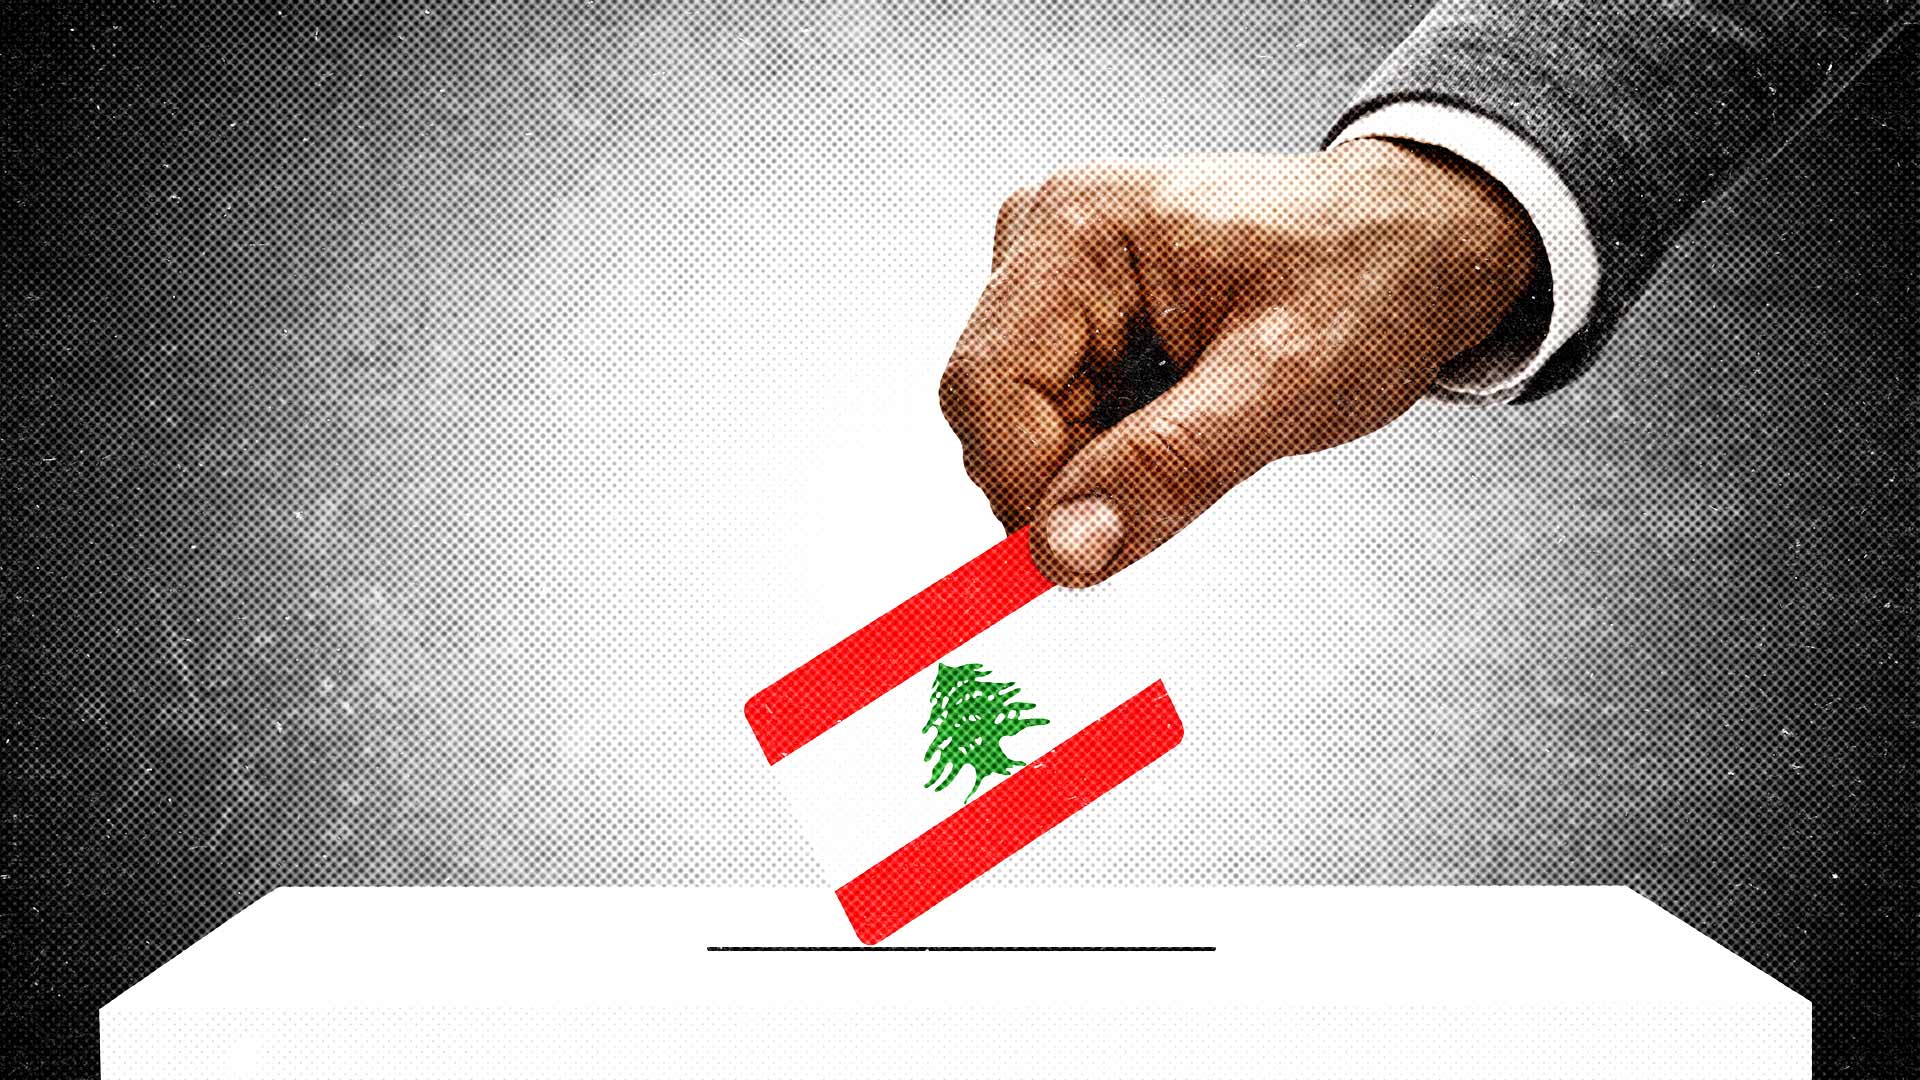 Getting Serious: Could EU sanctions force fair elections in Lebanon?